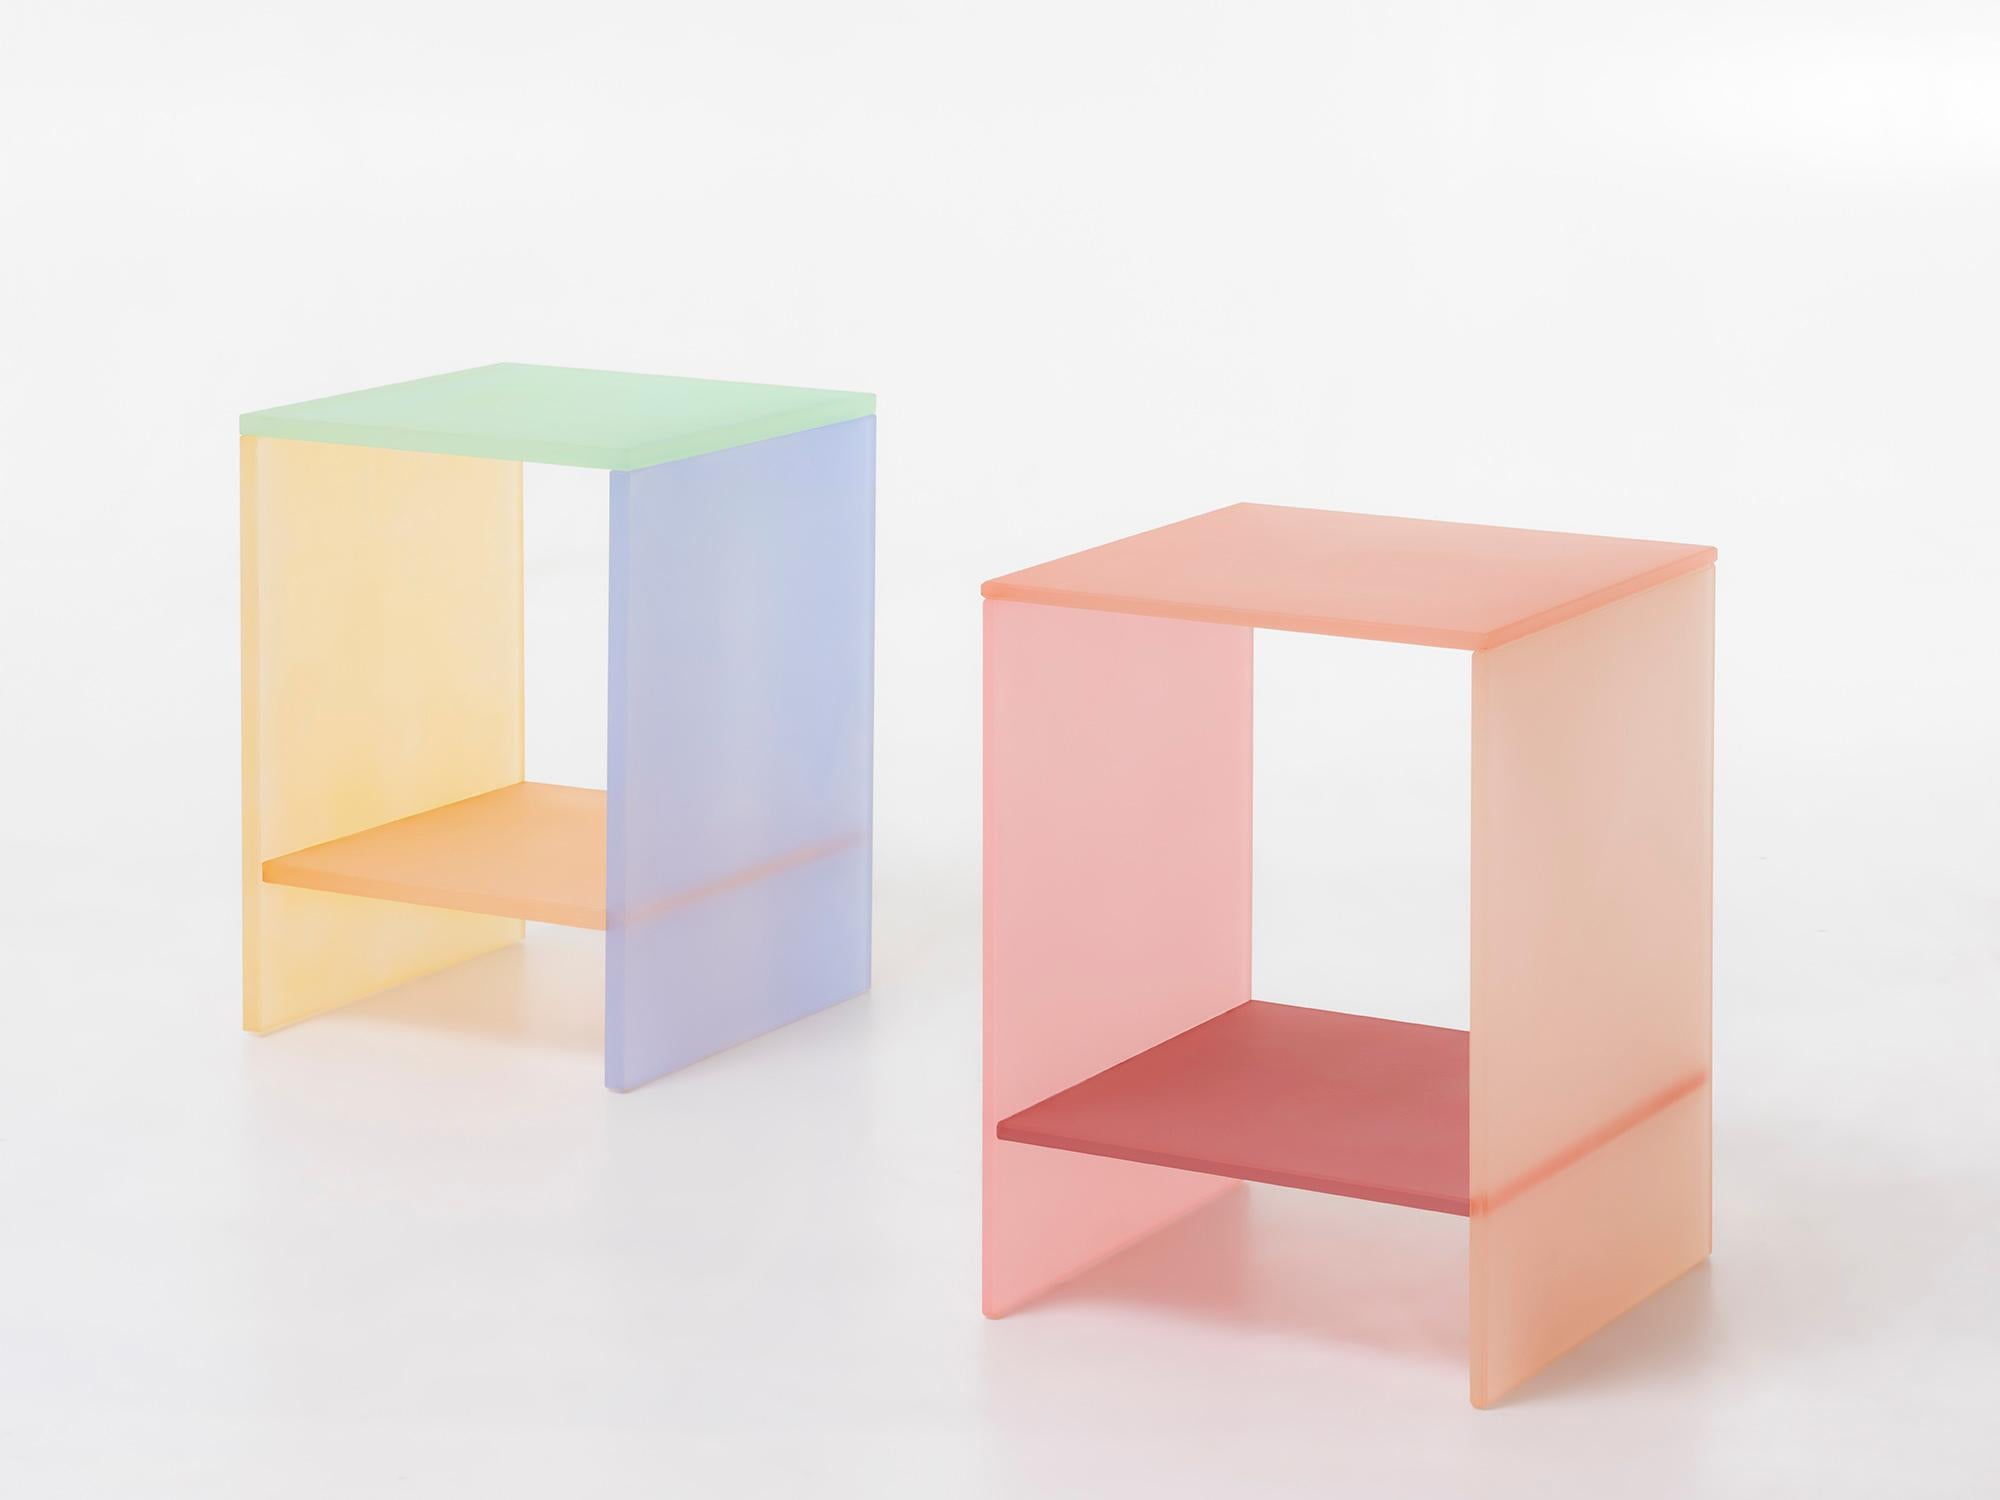 The Tone Table is inspired by the traditional colors of Korea, especially 